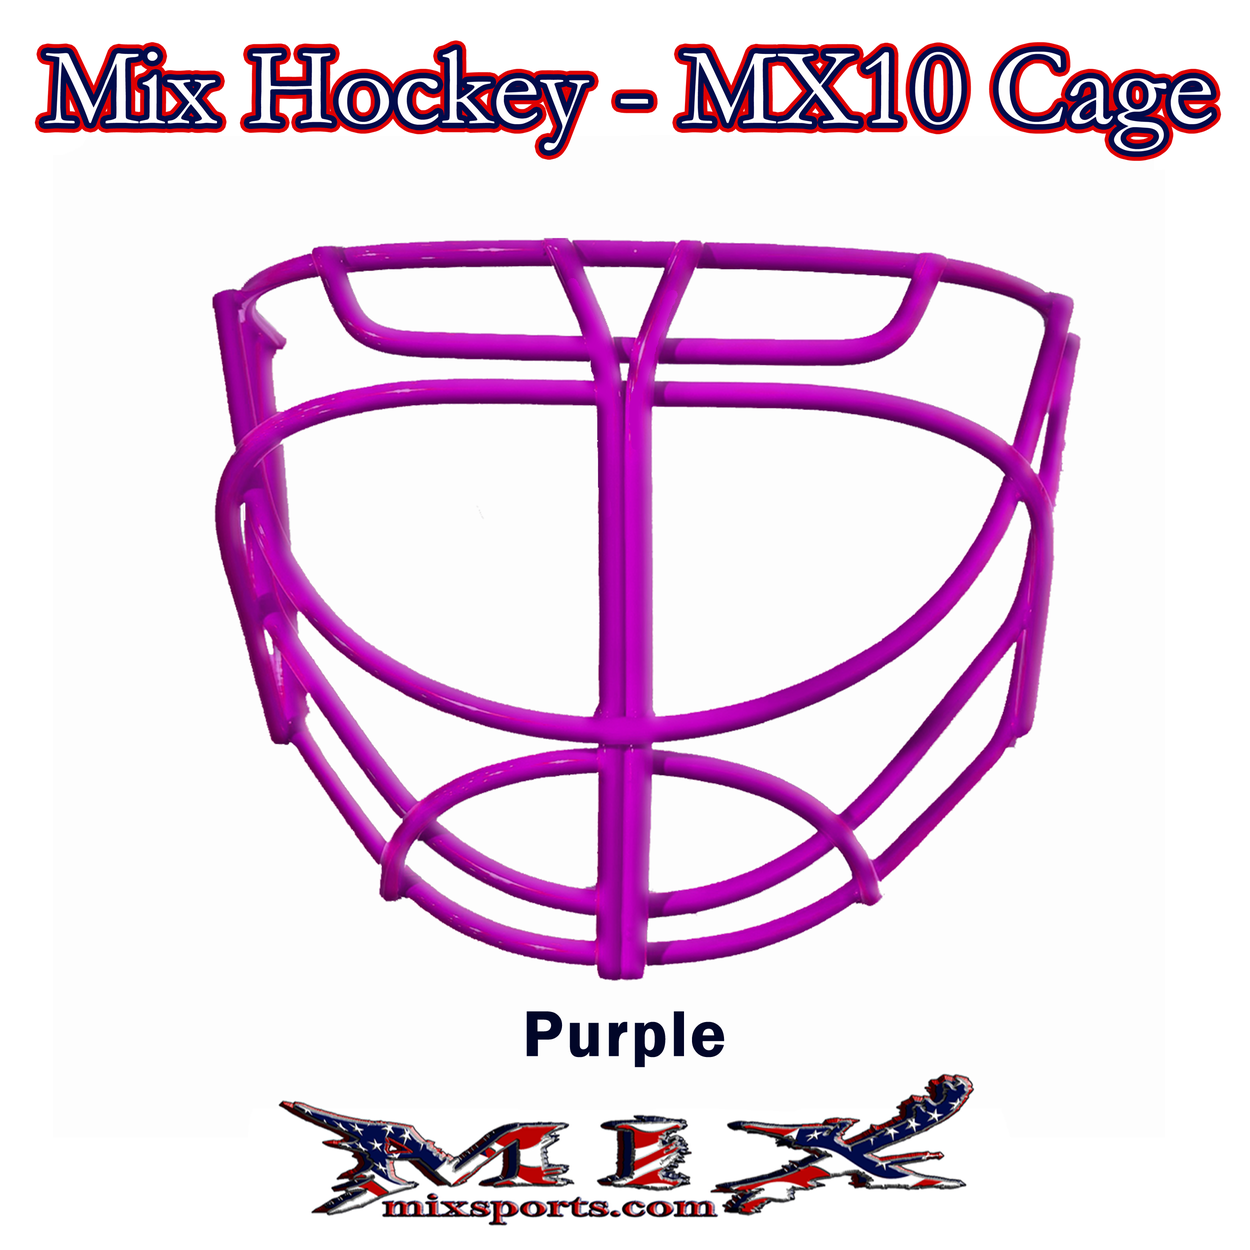 Mix Hockey - MX10 Cat Eye Goalie cage (Includes clips and screws) - Purple